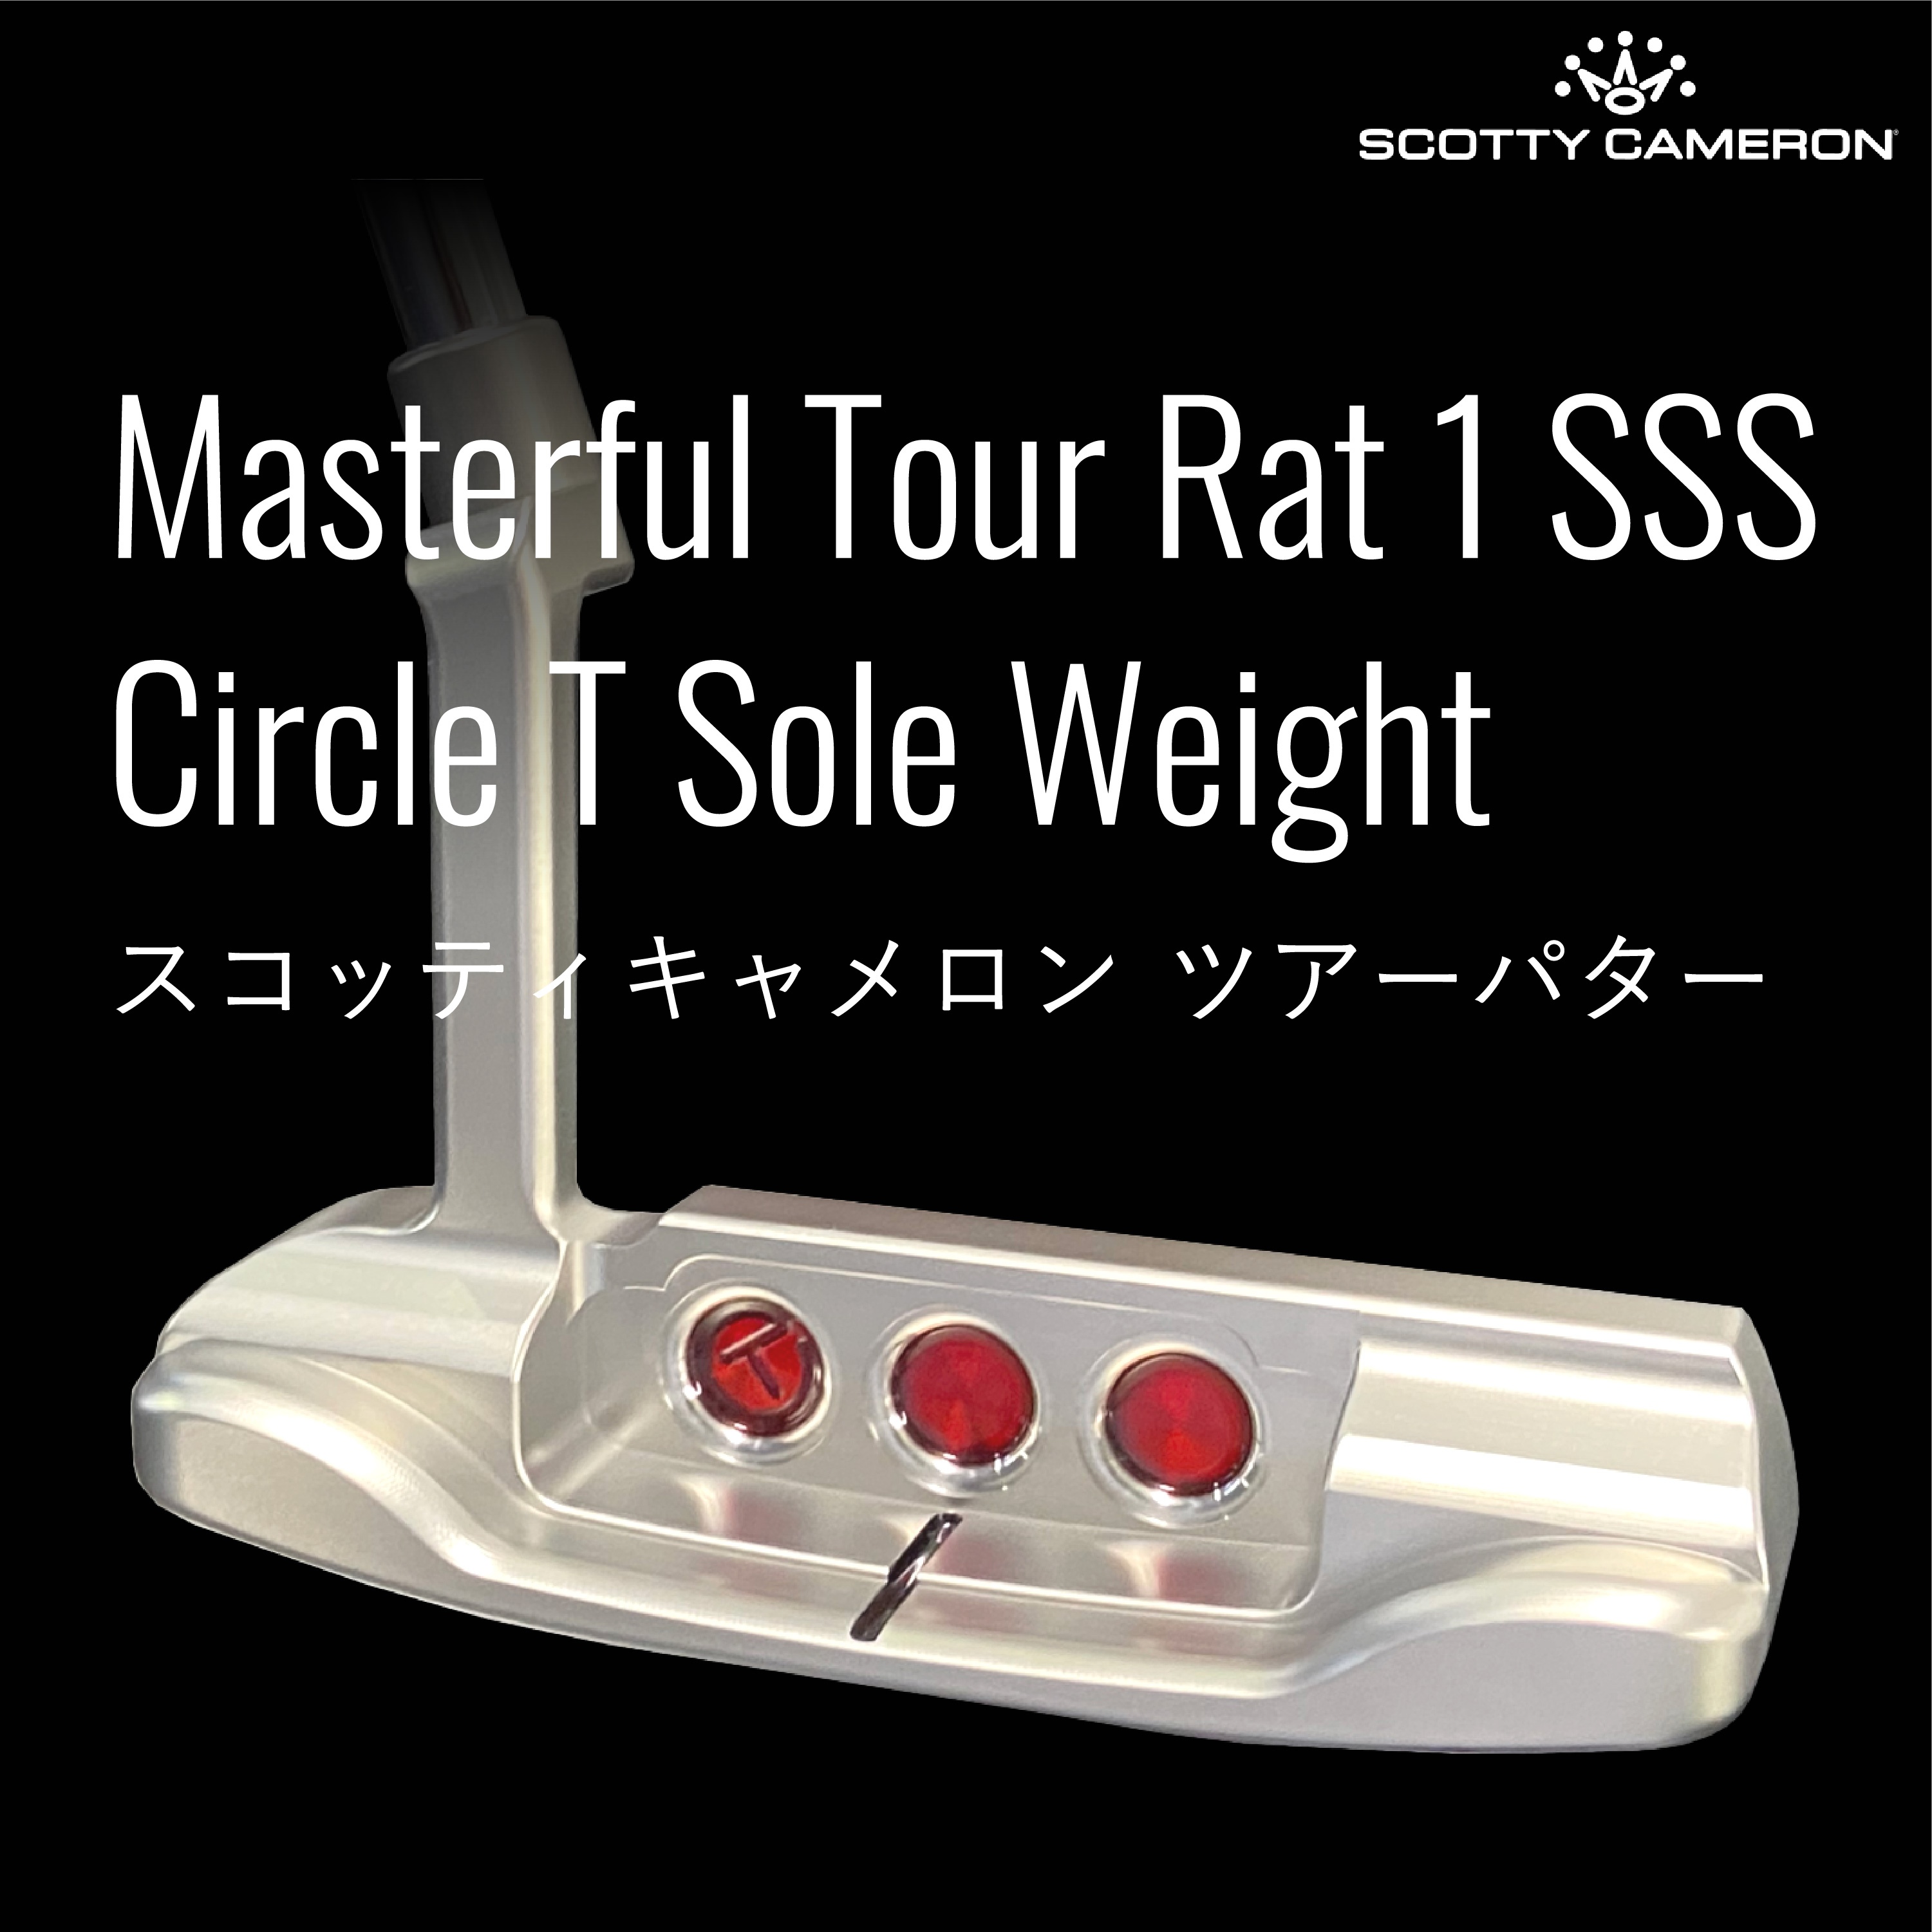 Scotty Cameron Masterful Tour Rat 1 SSS Circle T Sole Weight